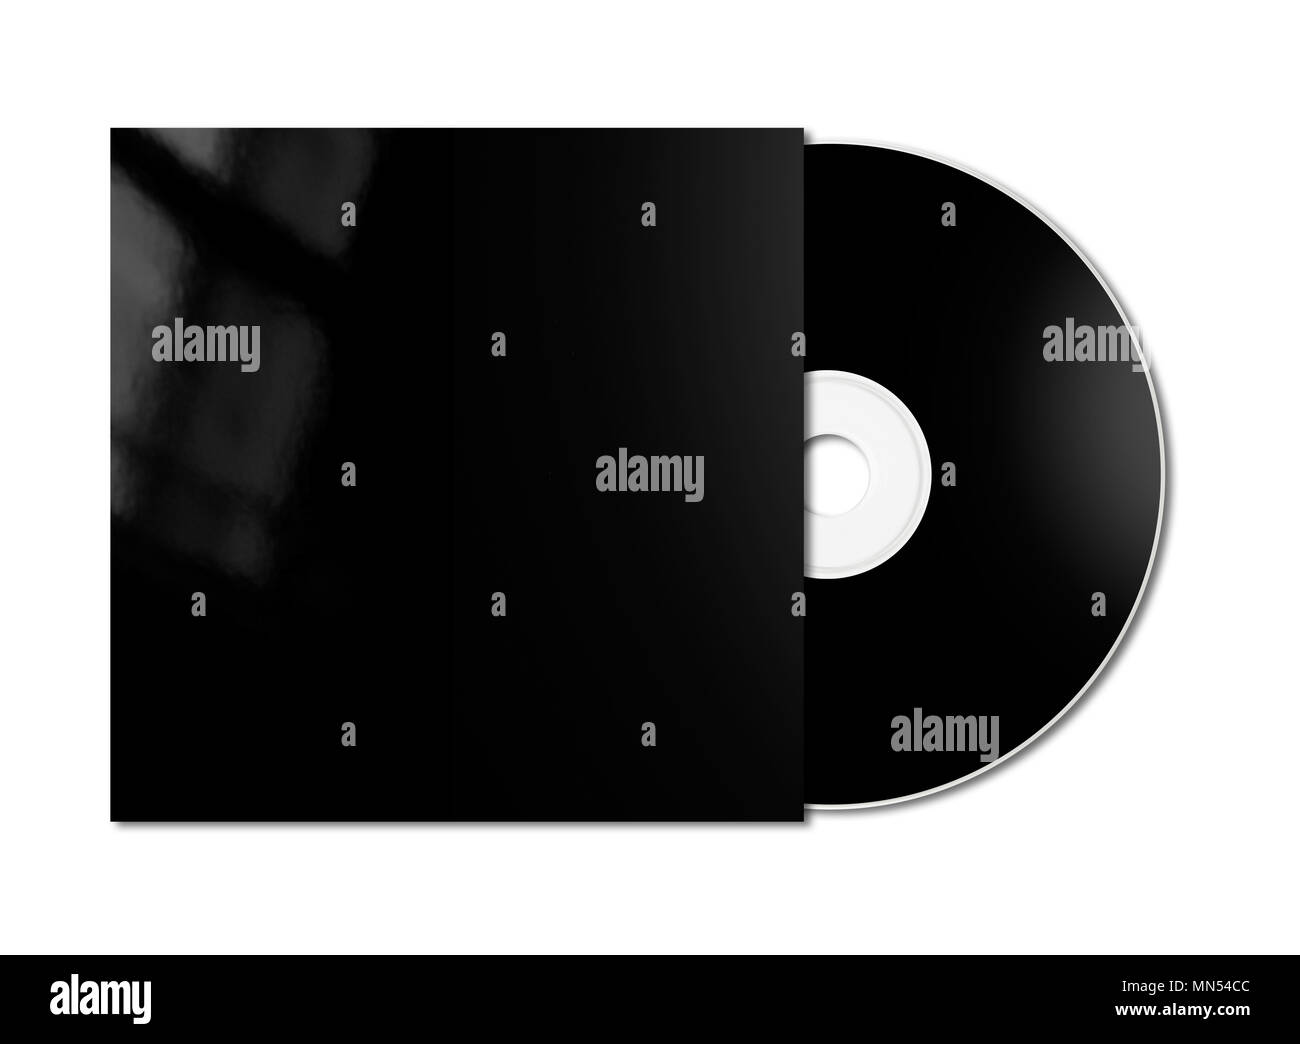 Download Black Cd Dvd And Cover Mockup Template Isolated On White Stock Photo Alamy PSD Mockup Templates